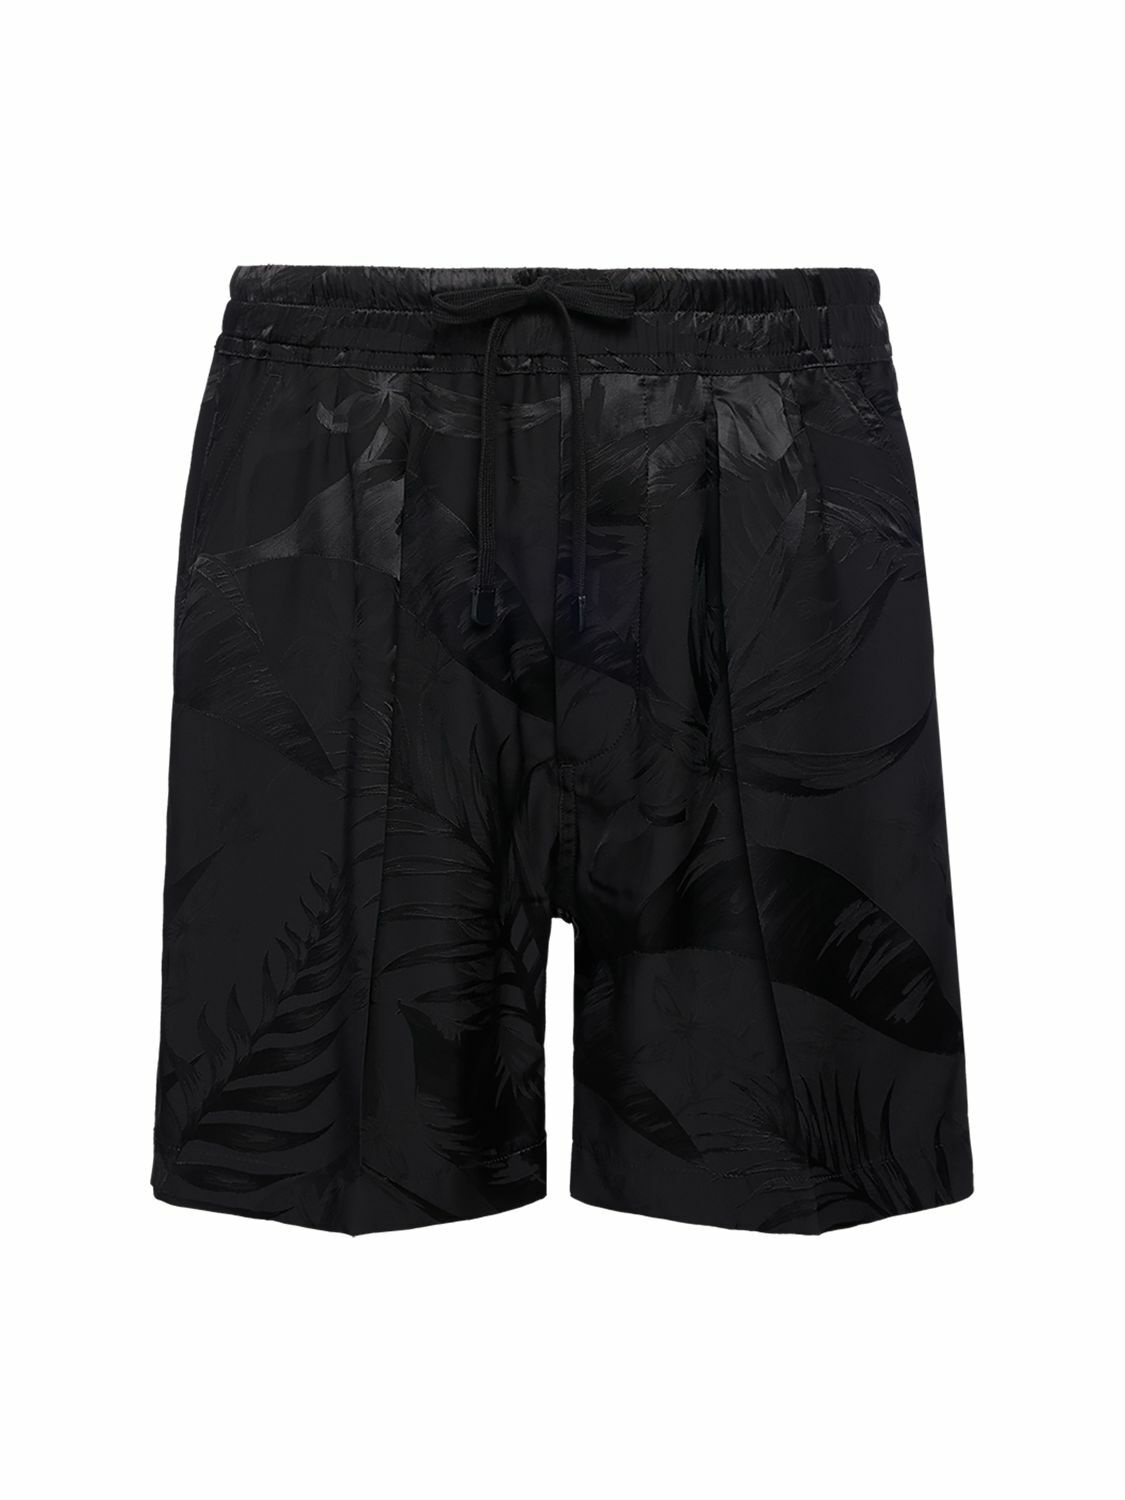 Photo: TOM FORD - Pleated Floral Jacquard Viscose Shorts